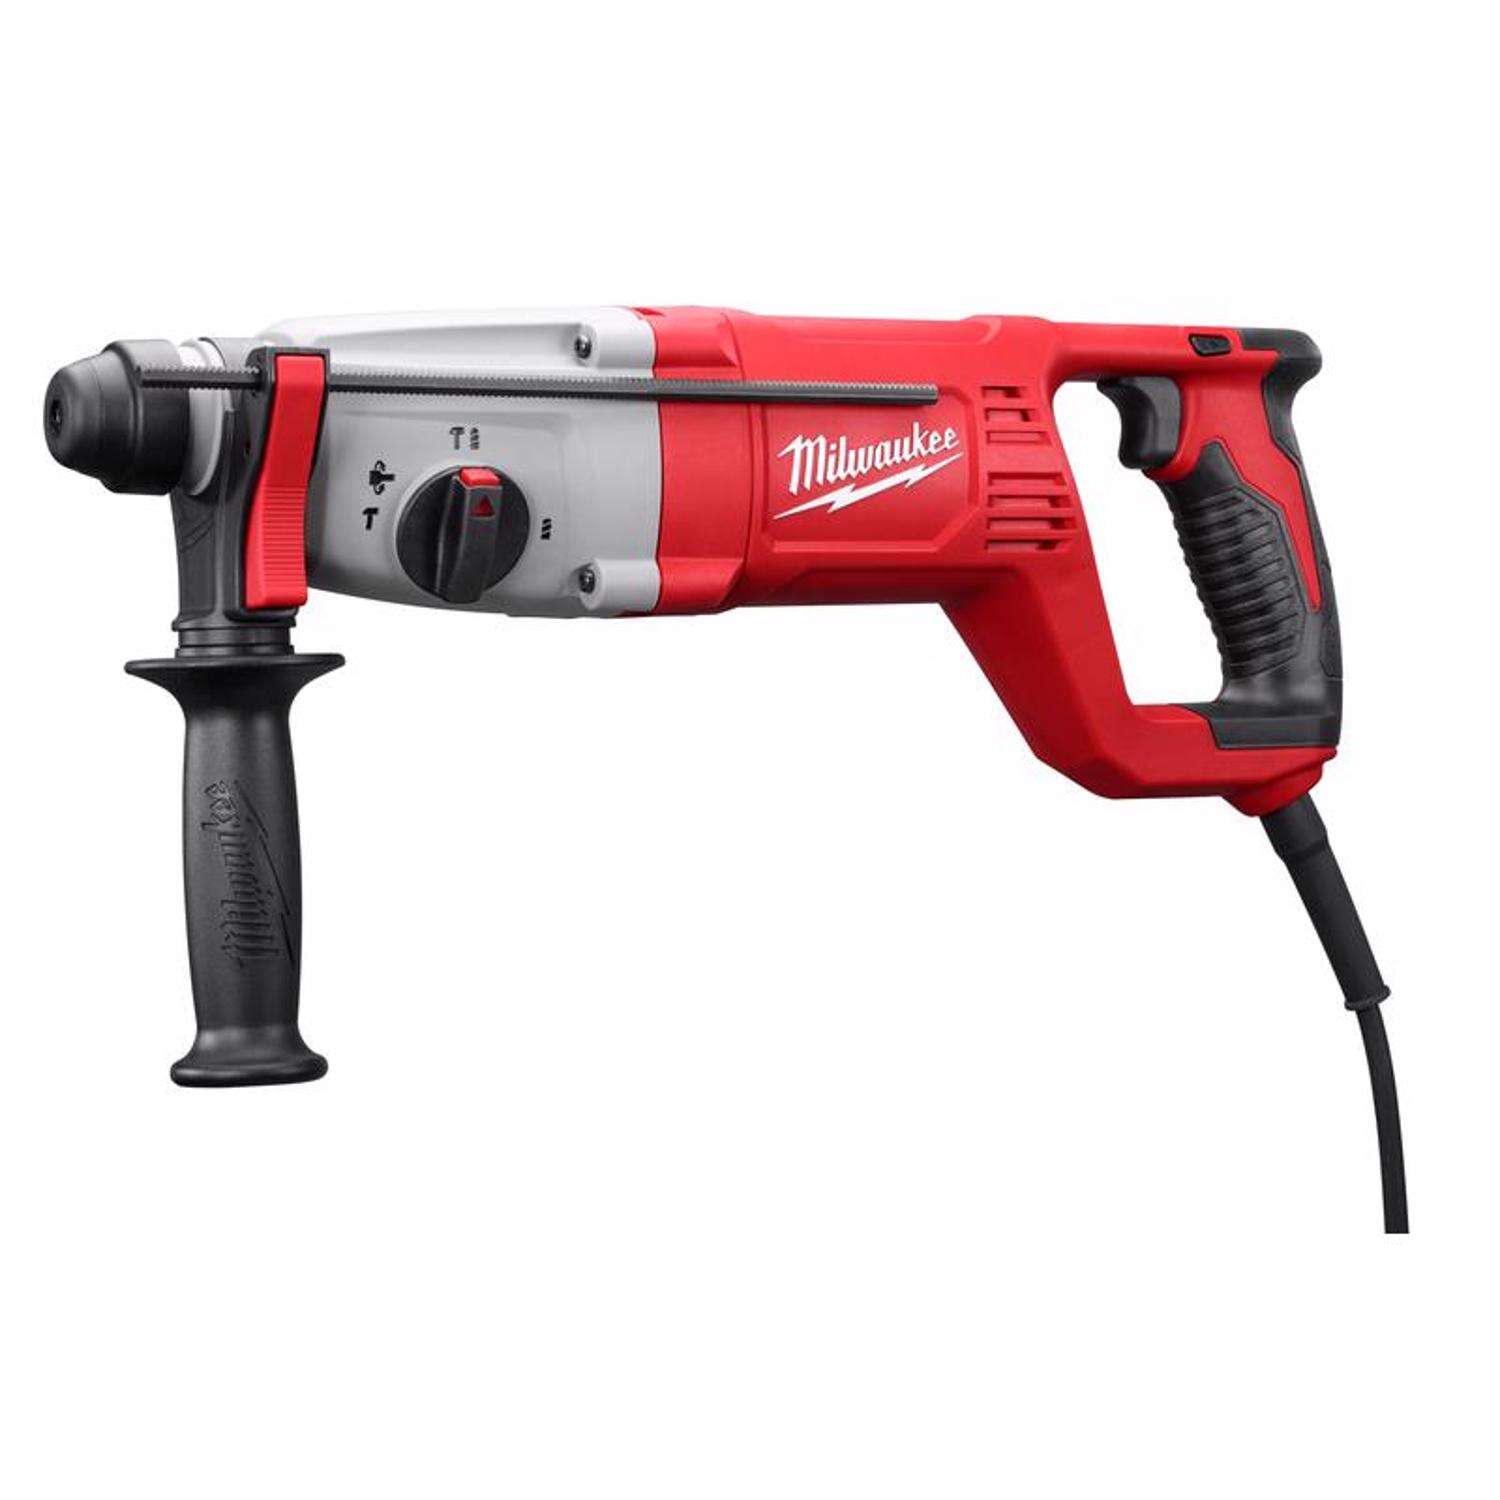 Milwaukee 8 Amp Corded 1 in. SDS D-Handle Rotary Hammer- $130